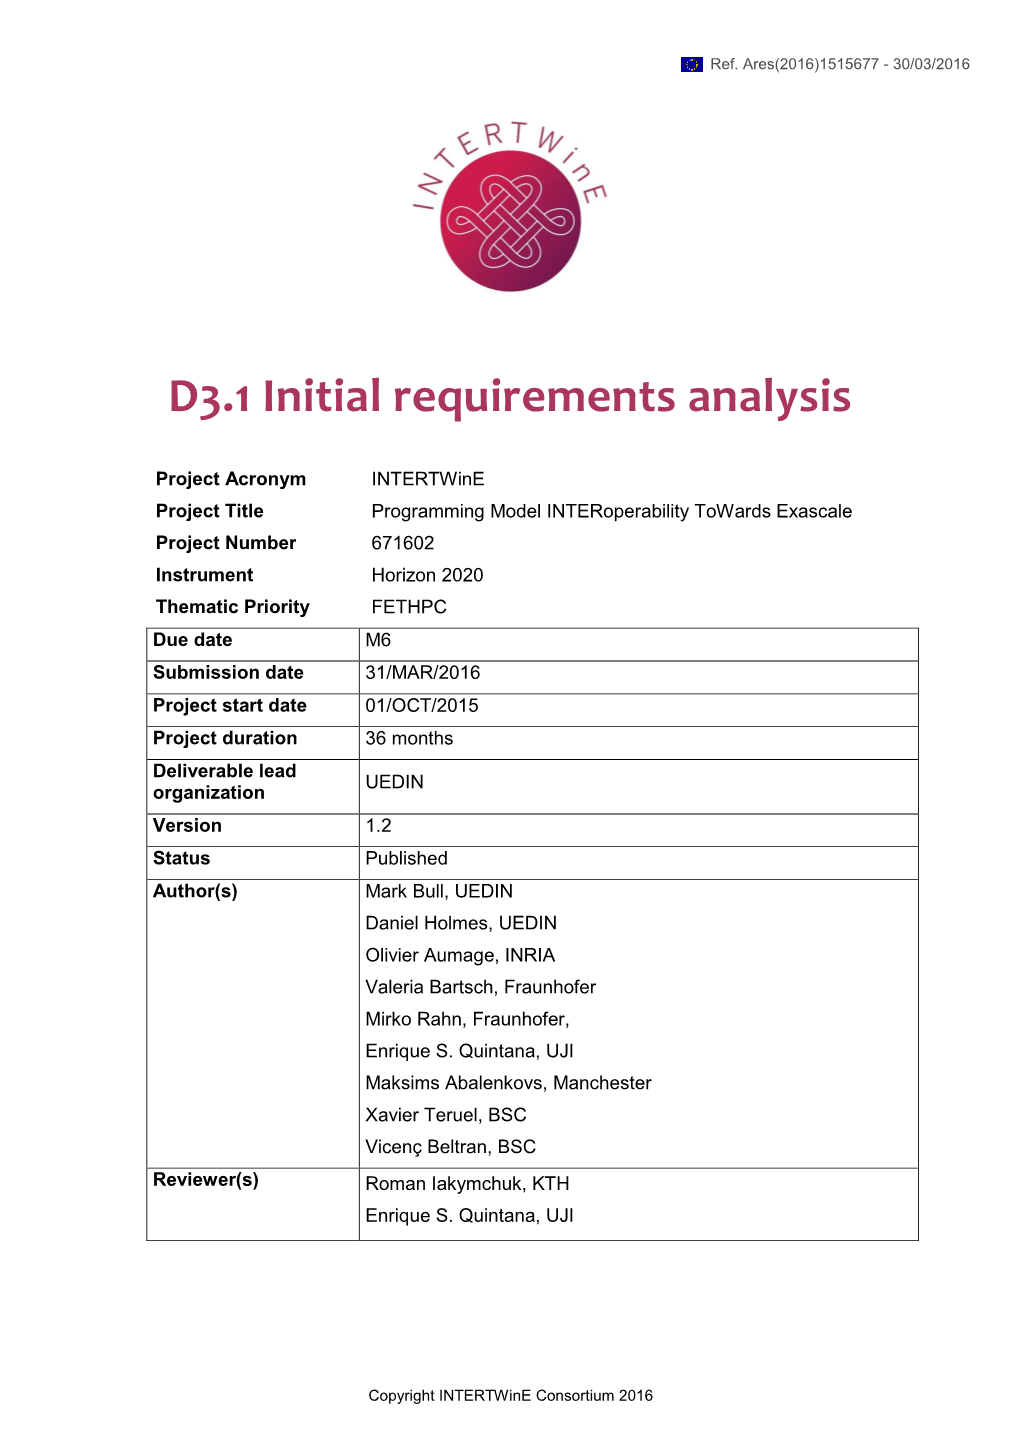 D3.1 Initial Requirements Analysis